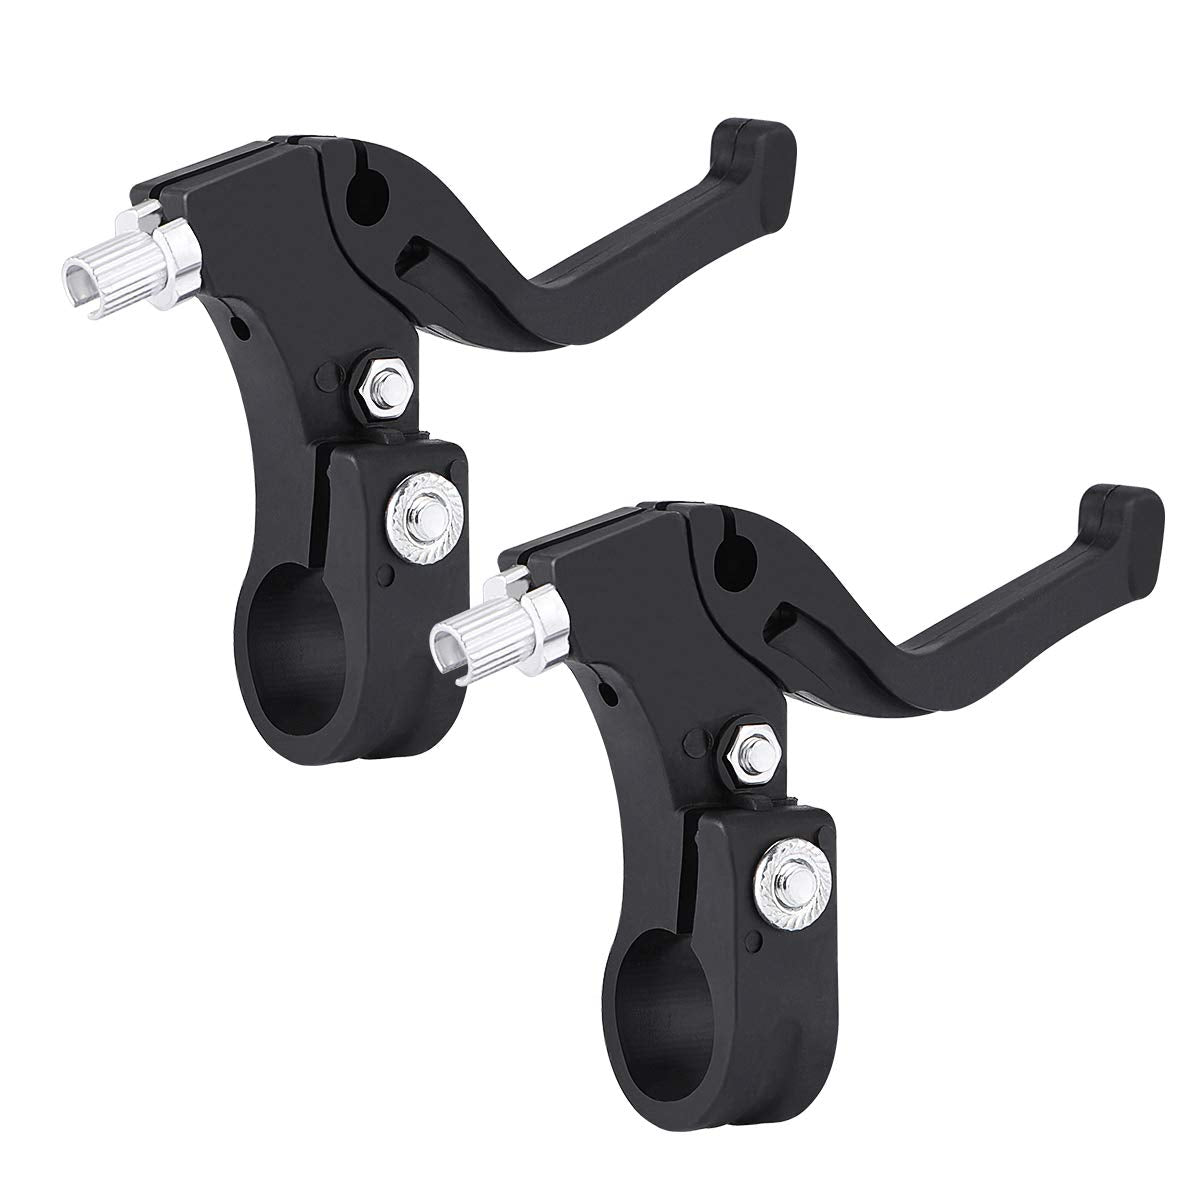 VOSAREA 1 Pair Bicycle Brake Lever Children Brake Handle Kids Bike Cycling Brake Levers Replacement Bike Spare Parts Bicycle Accessories for Kids Bike